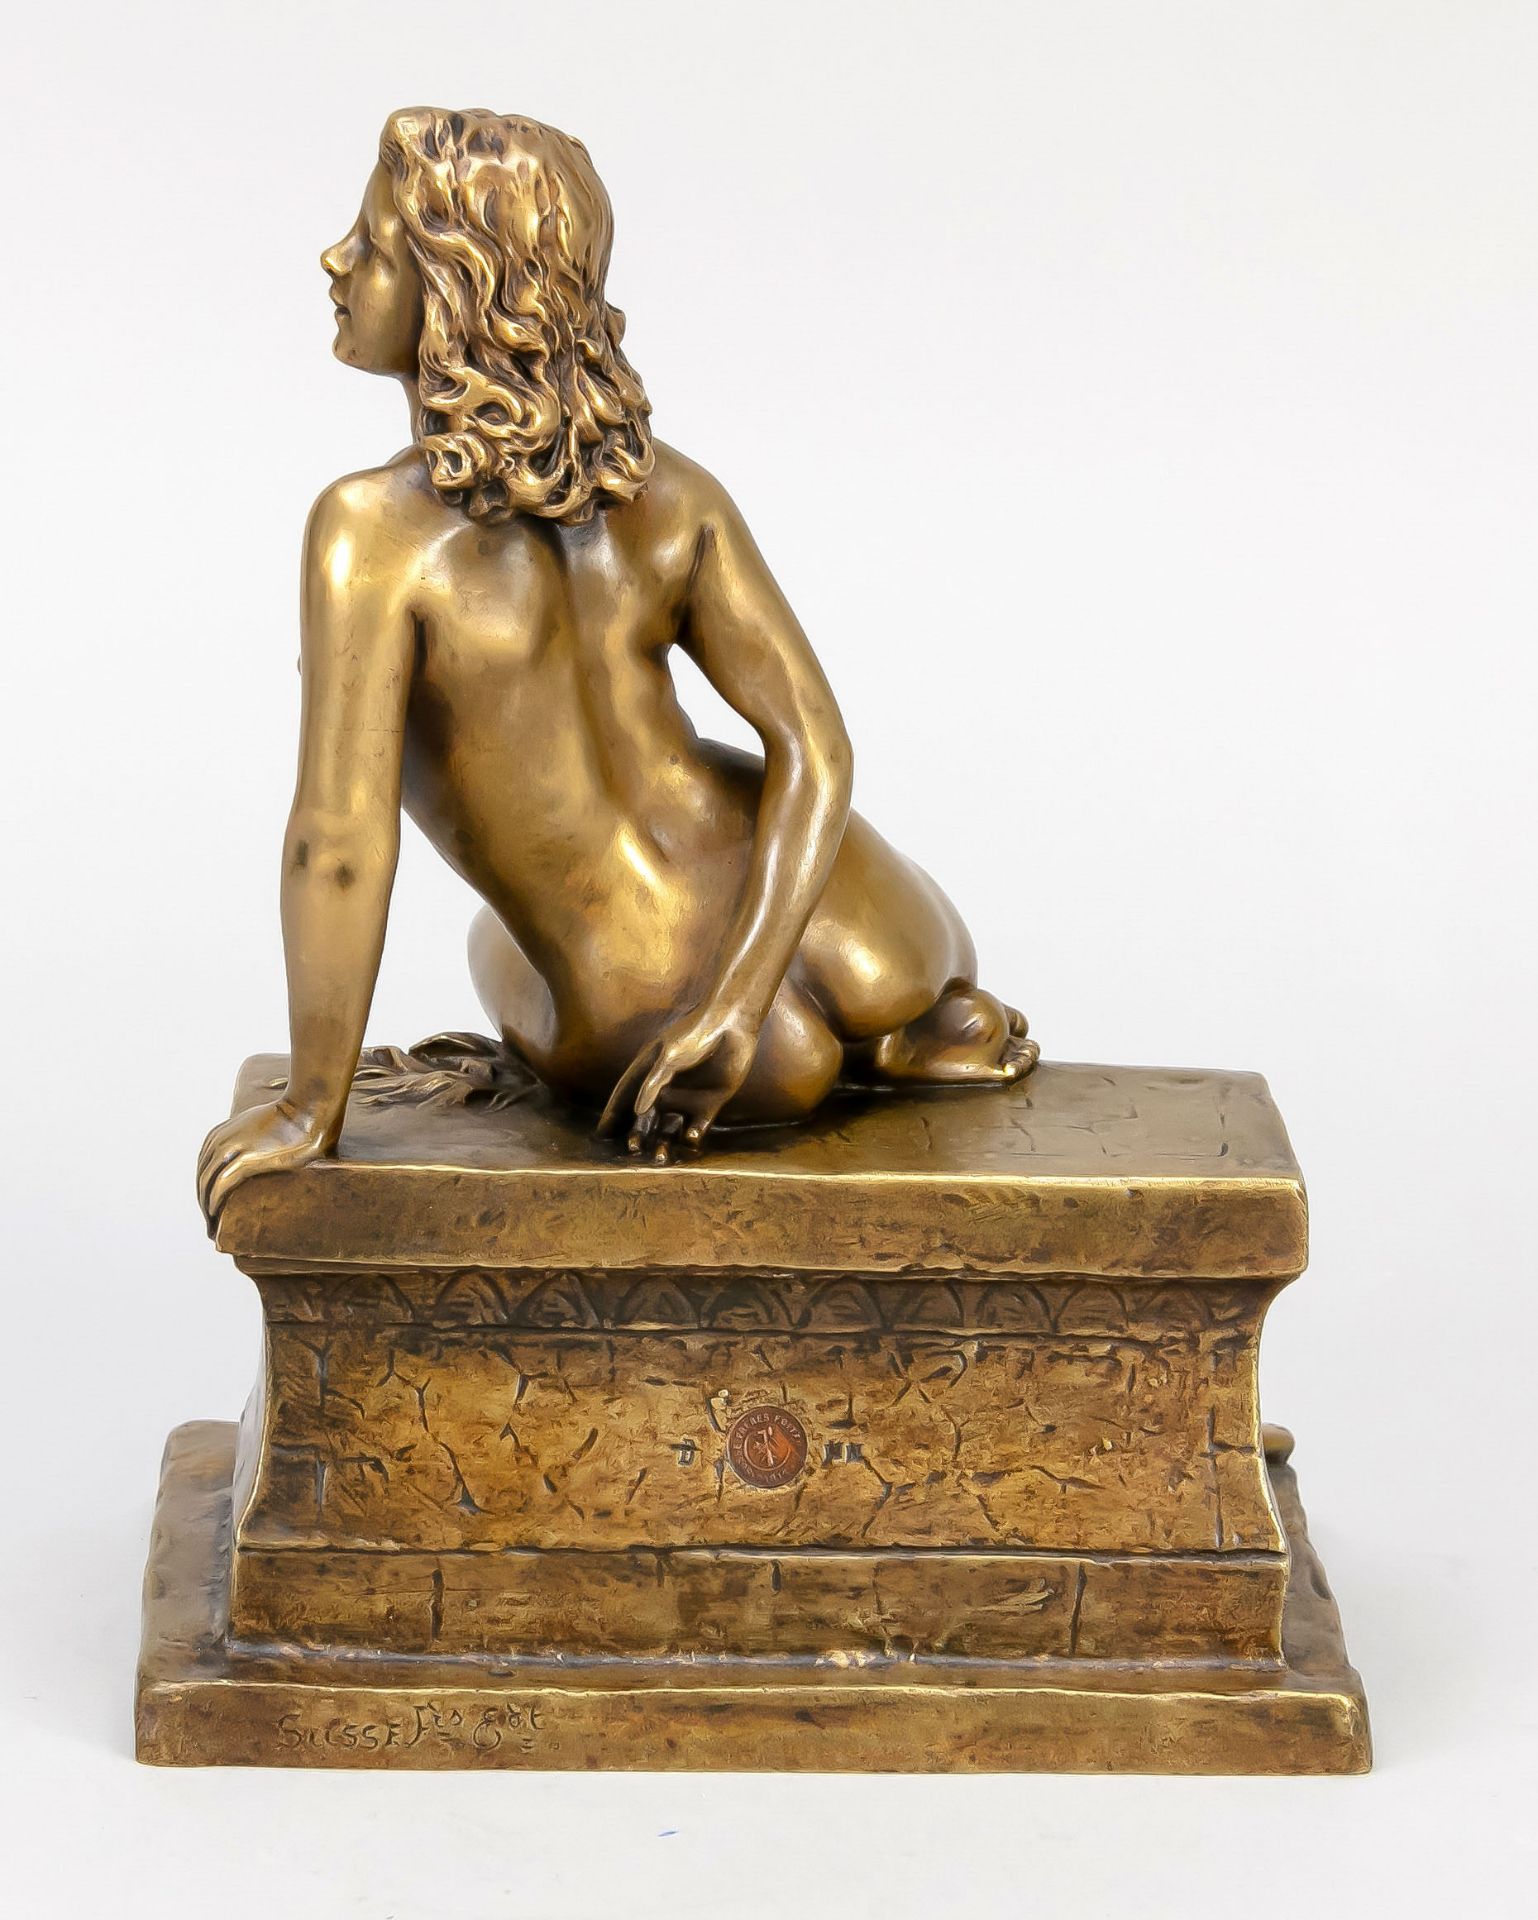 Joé Descomps (1869-1950), seated nude of a young woman, bronze, discreetly patinated, signed u. - Image 2 of 2